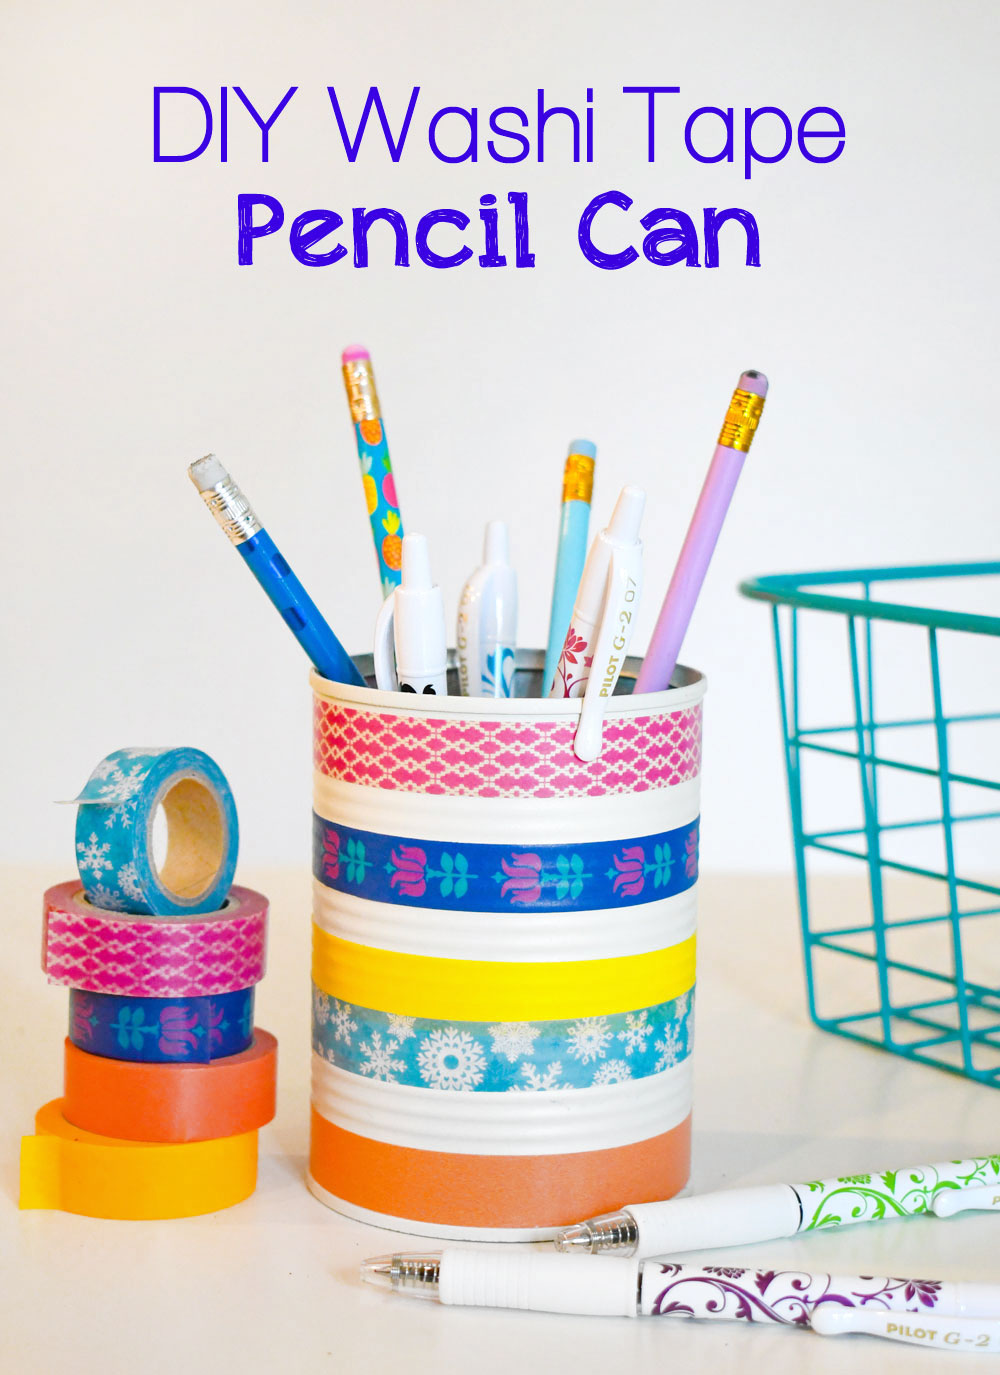 How to make a DIY washi tape pencil can